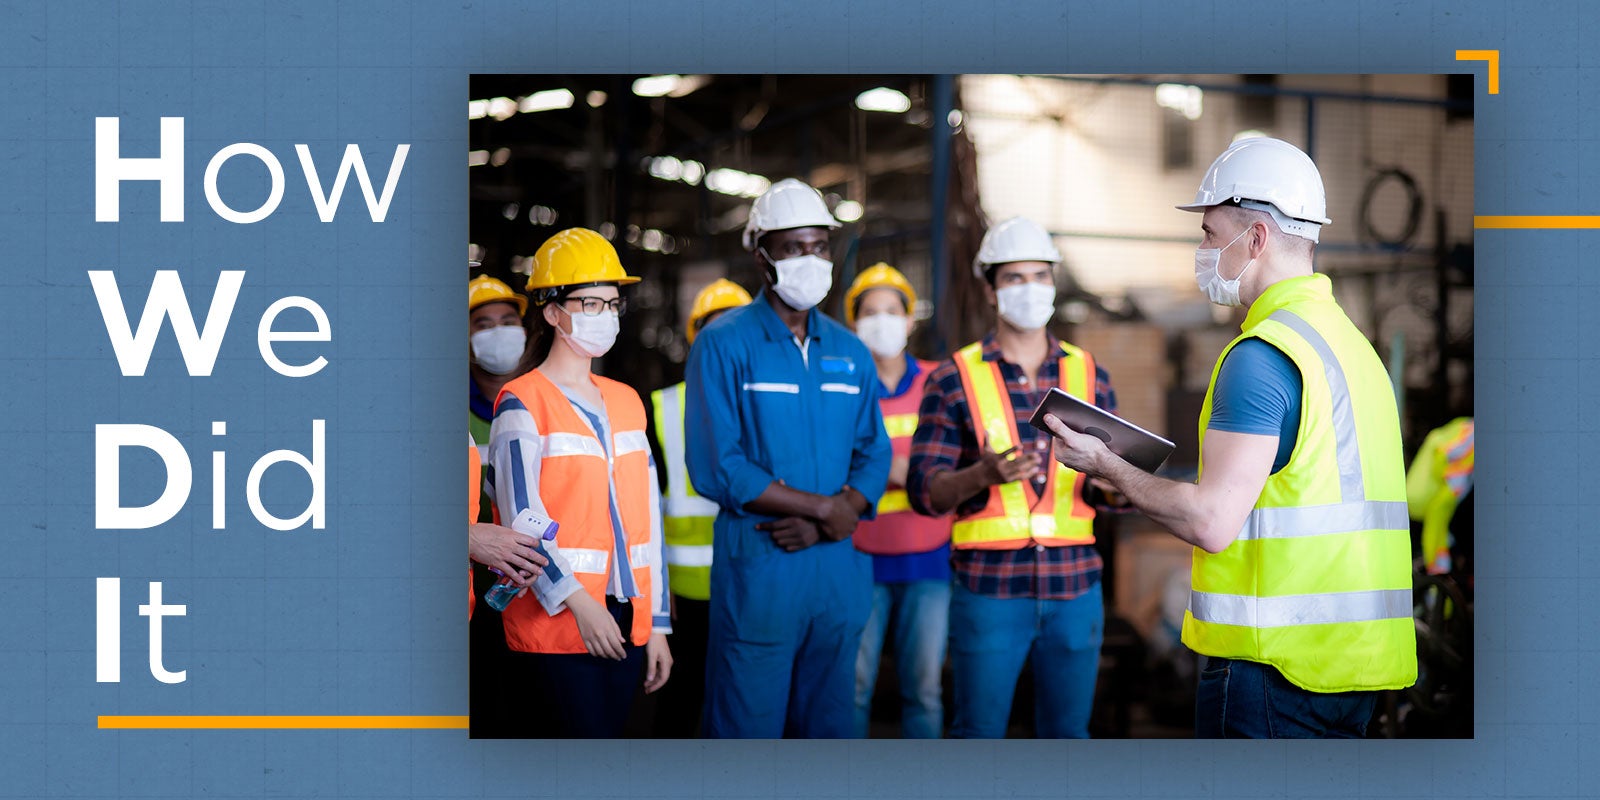 "How We Did It" title alongside an image of a construction team getting briefed by a leader to show this video is about how DDI helped one firm with executive leadership succession planning